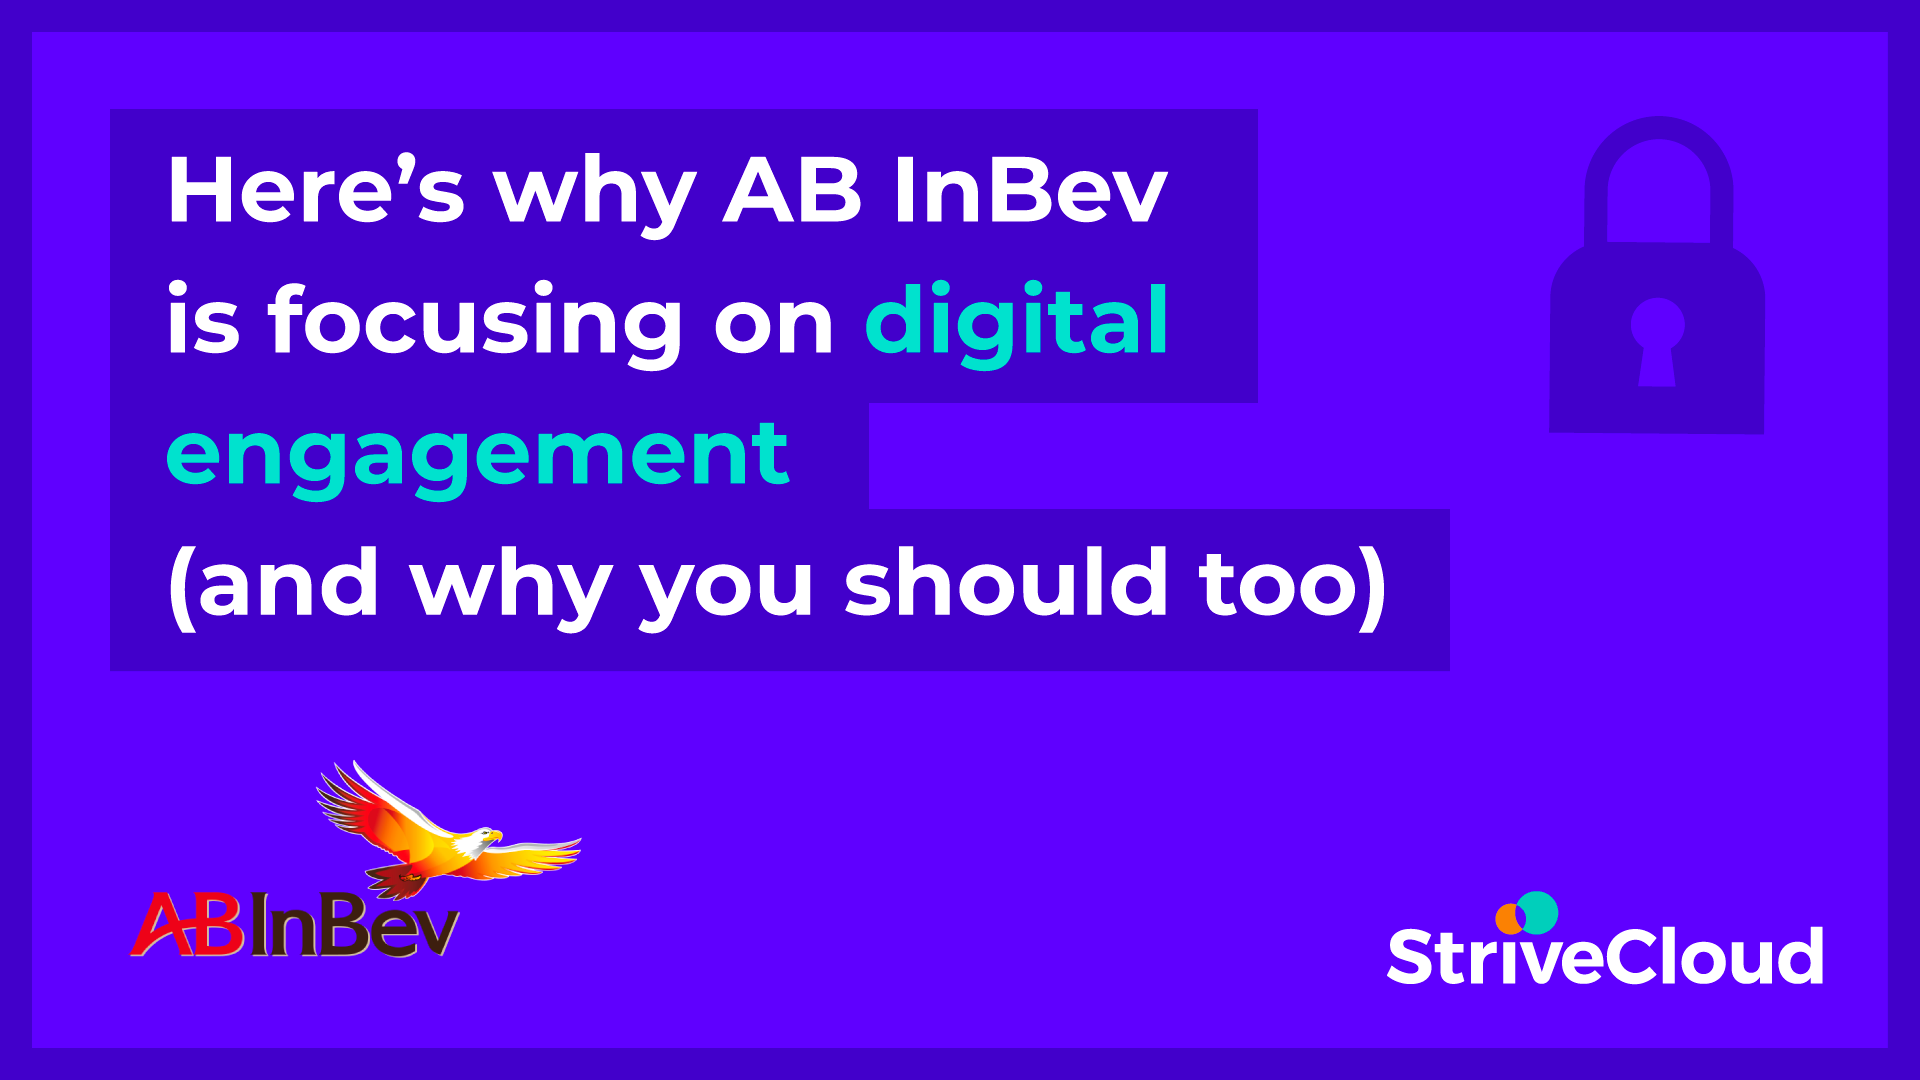 Interview: Here’s why AB InBev is focusing on digital engagement (and why you should too)